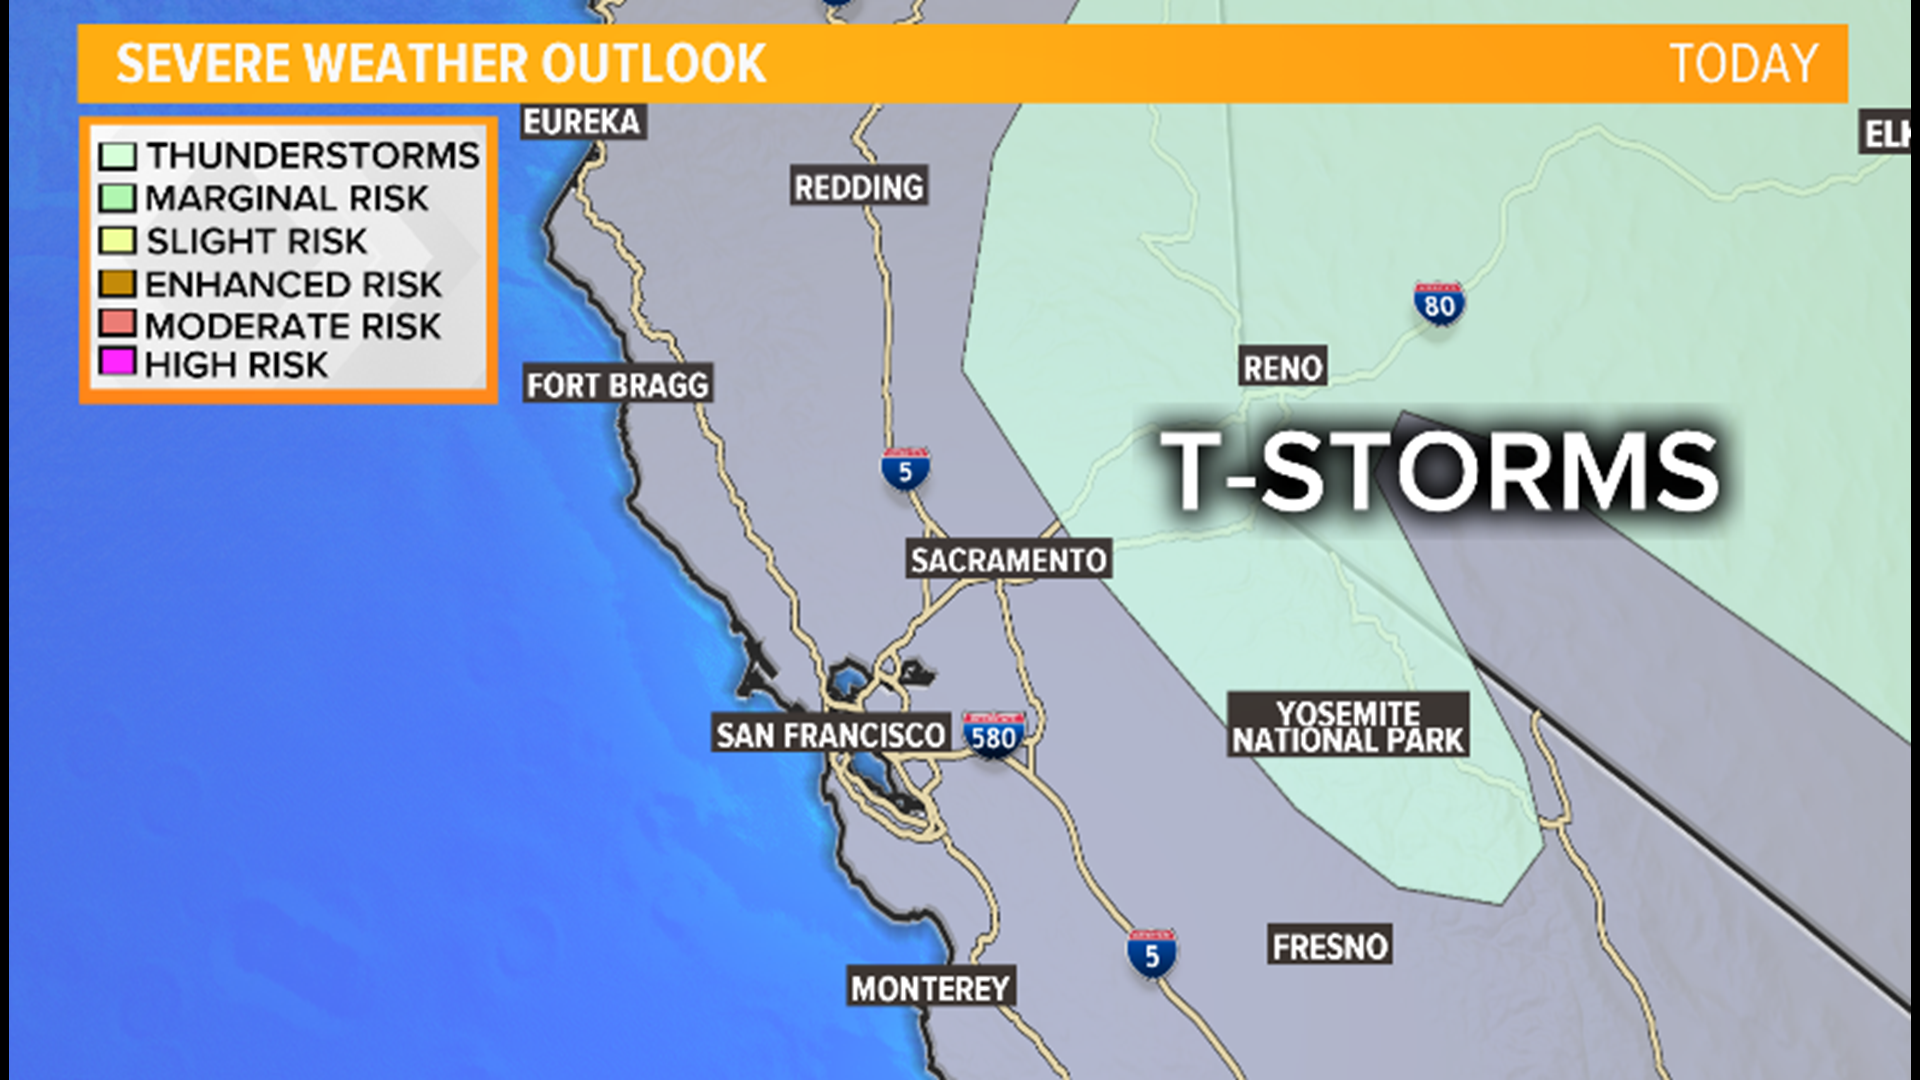 There's a chance of thunderstorms for the foothills and The Sierra on Thursday. Any thunderstorms that develop can produce small-sized hail and gusty winds.